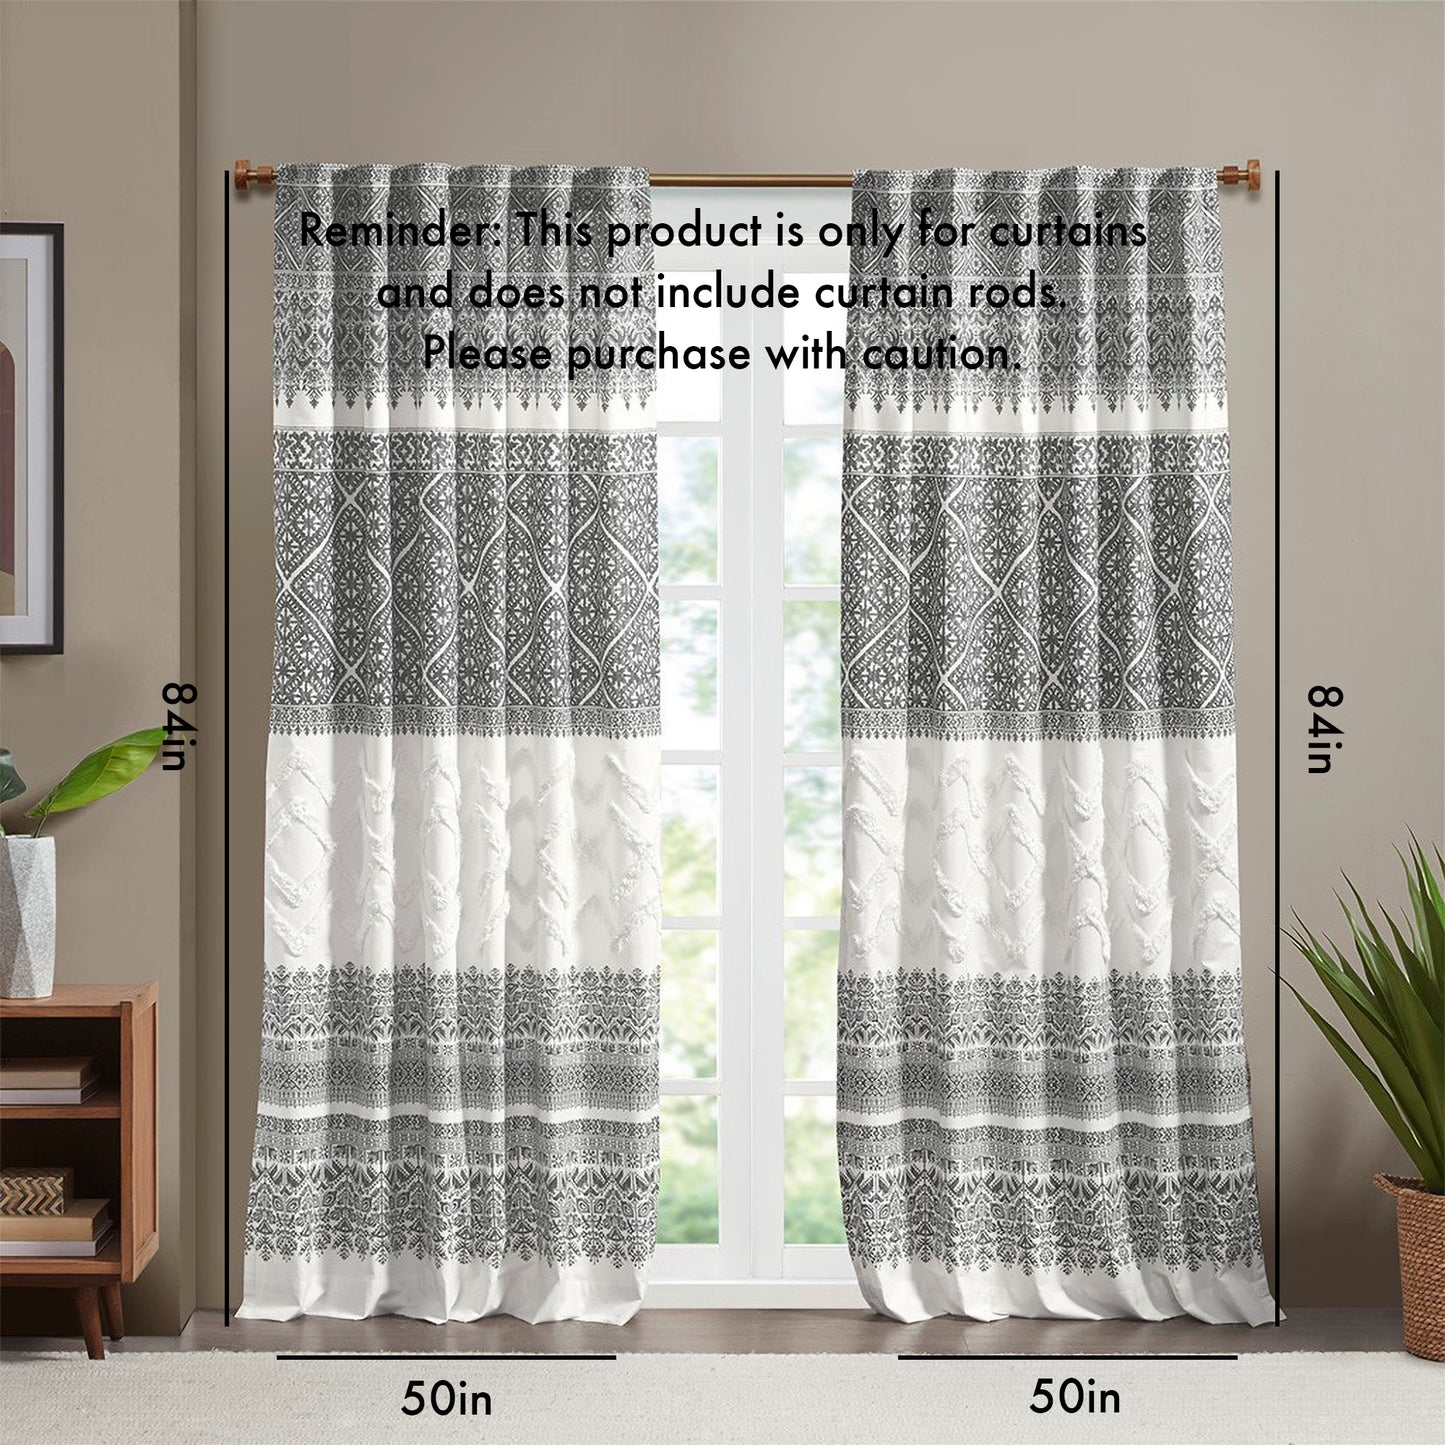 Cotton Printed Curtain Panel with Chenille detail and Lining